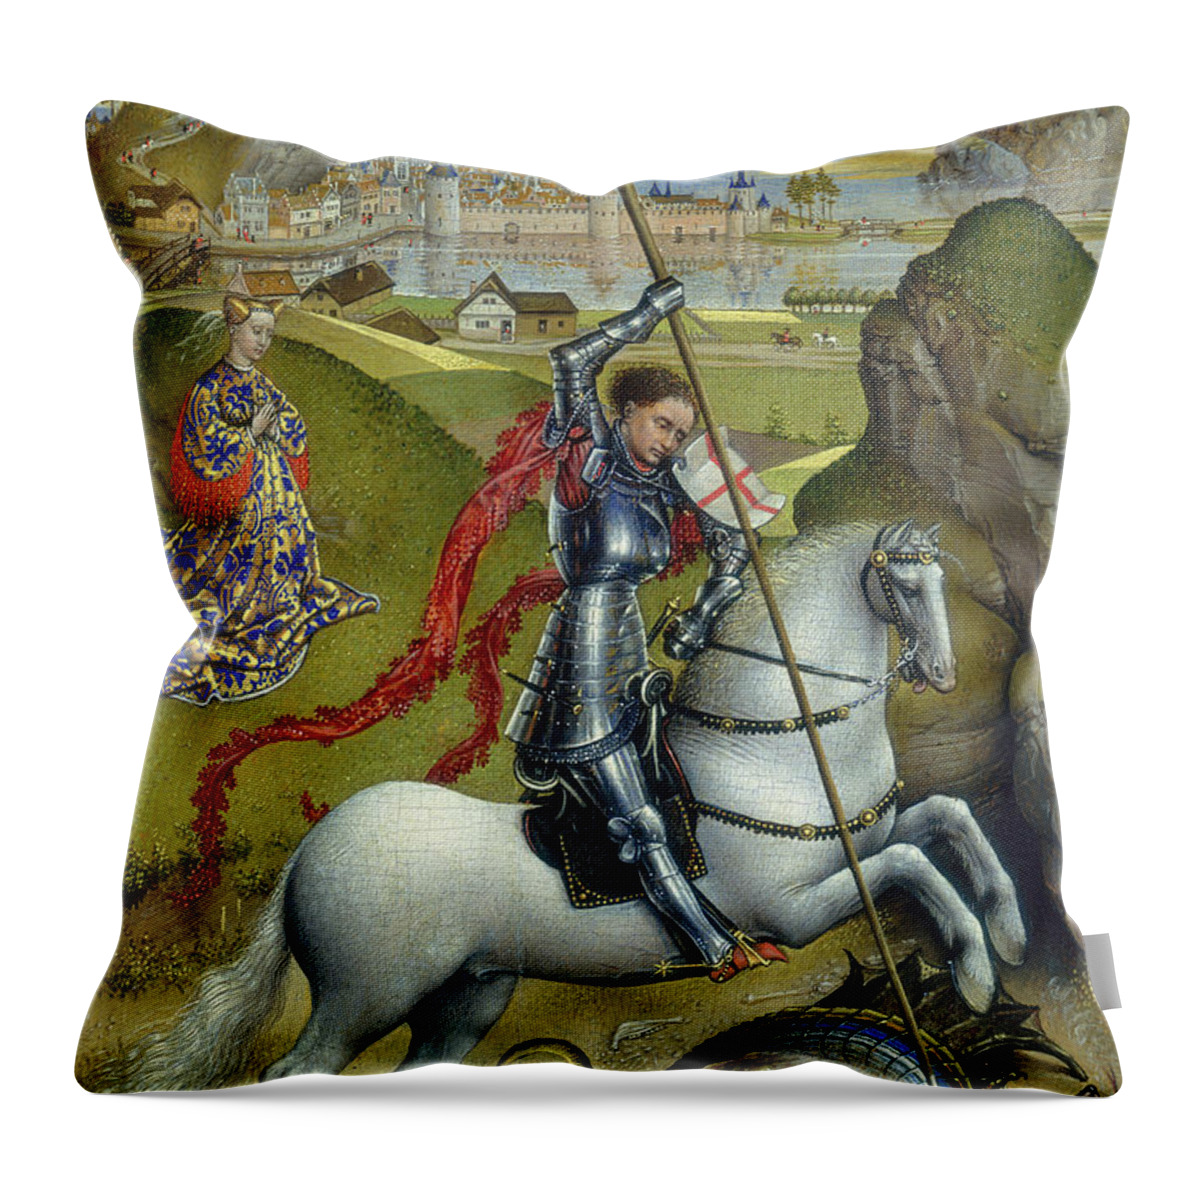 Weyden Throw Pillow featuring the painting St George and the Dragon by Rogier van der Weyden